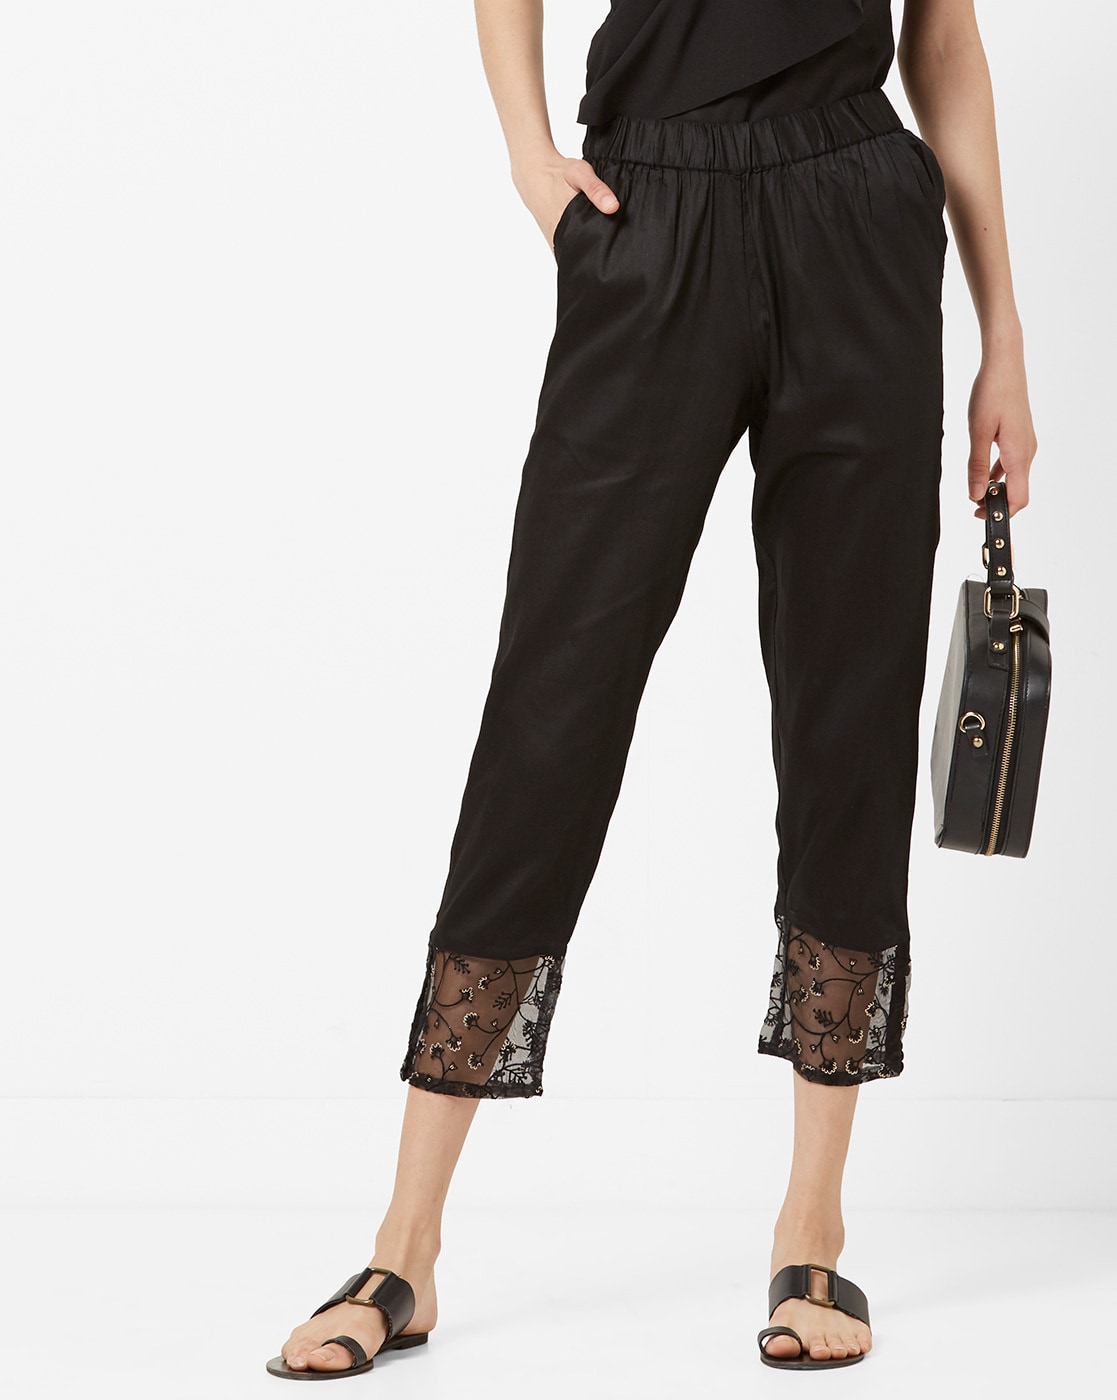 Trousers Lace  Buy Trousers Lace online in India